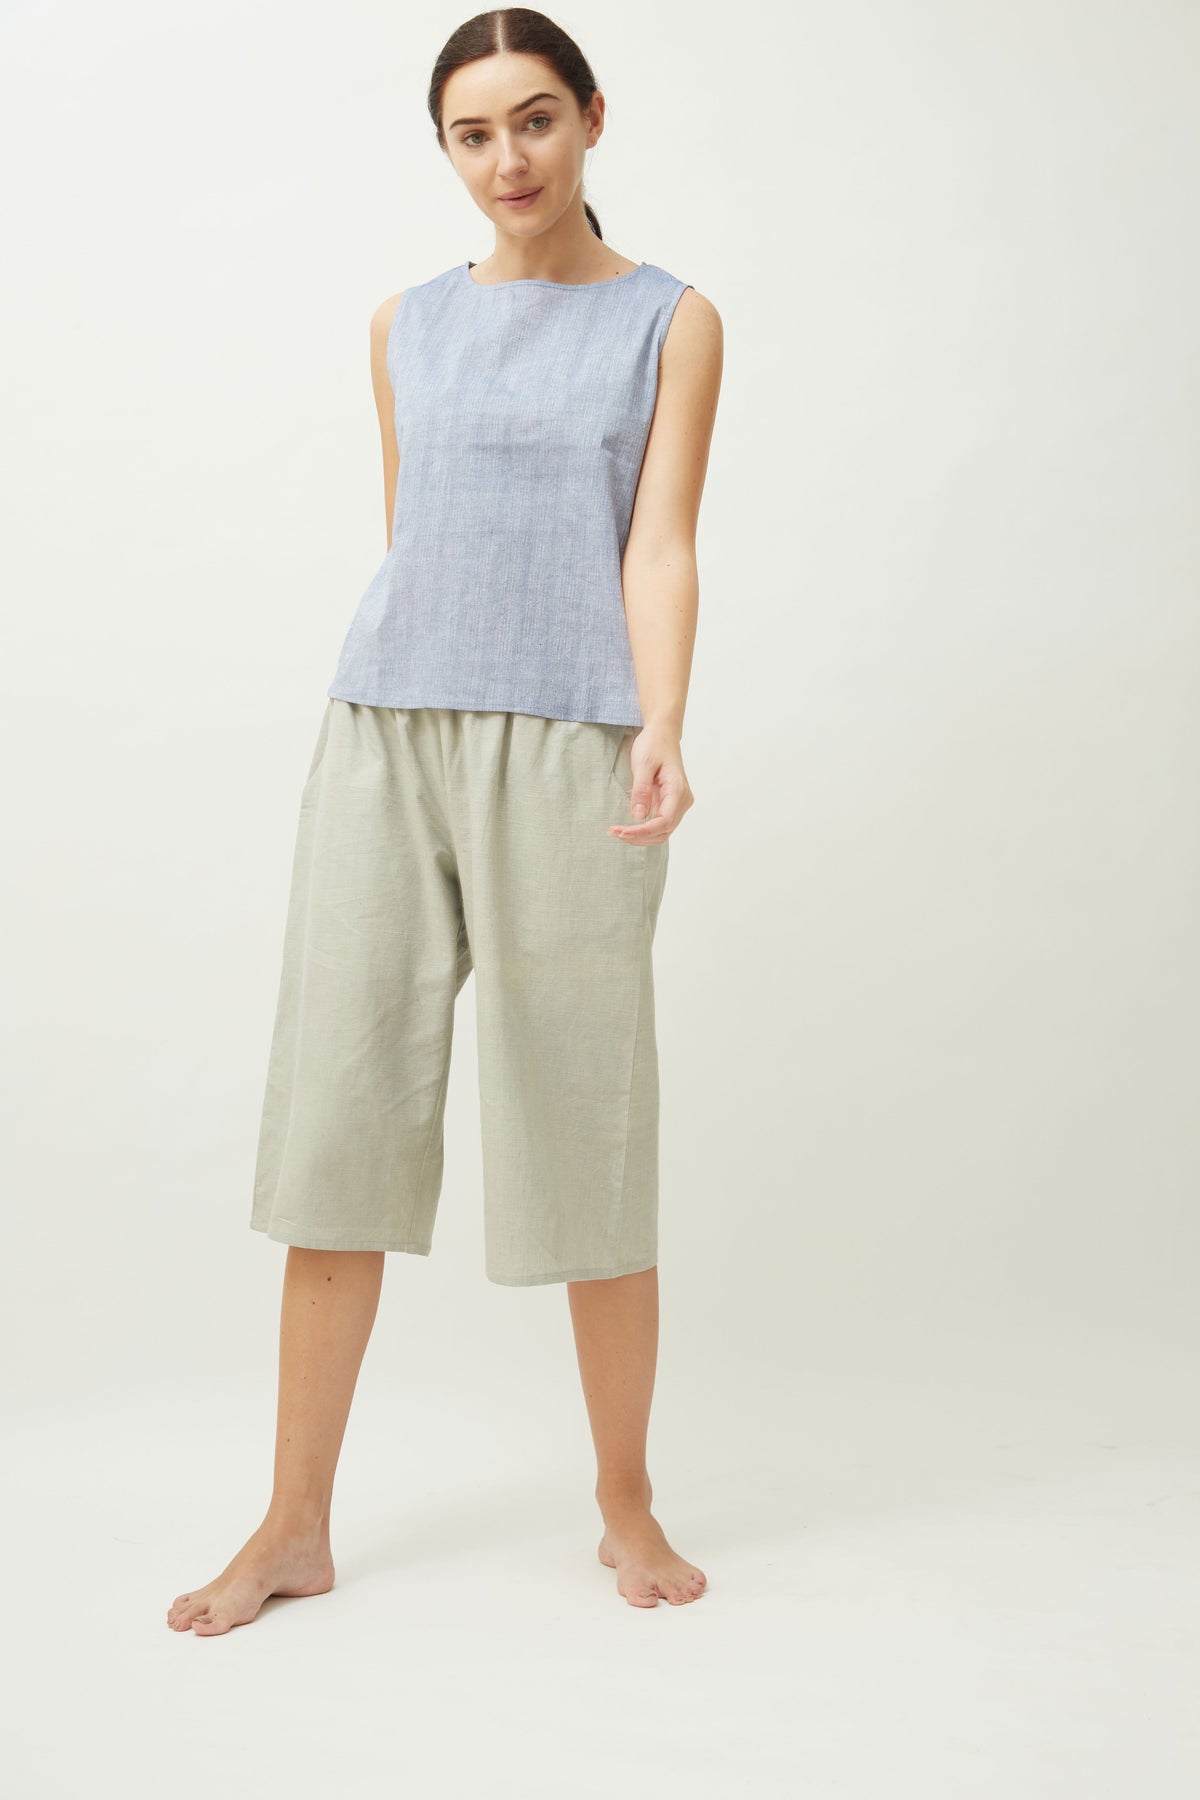 Saltpetre womens casual knee length culotte shorts with side pockets, in cloud grey in 100% organic cotton fabric.